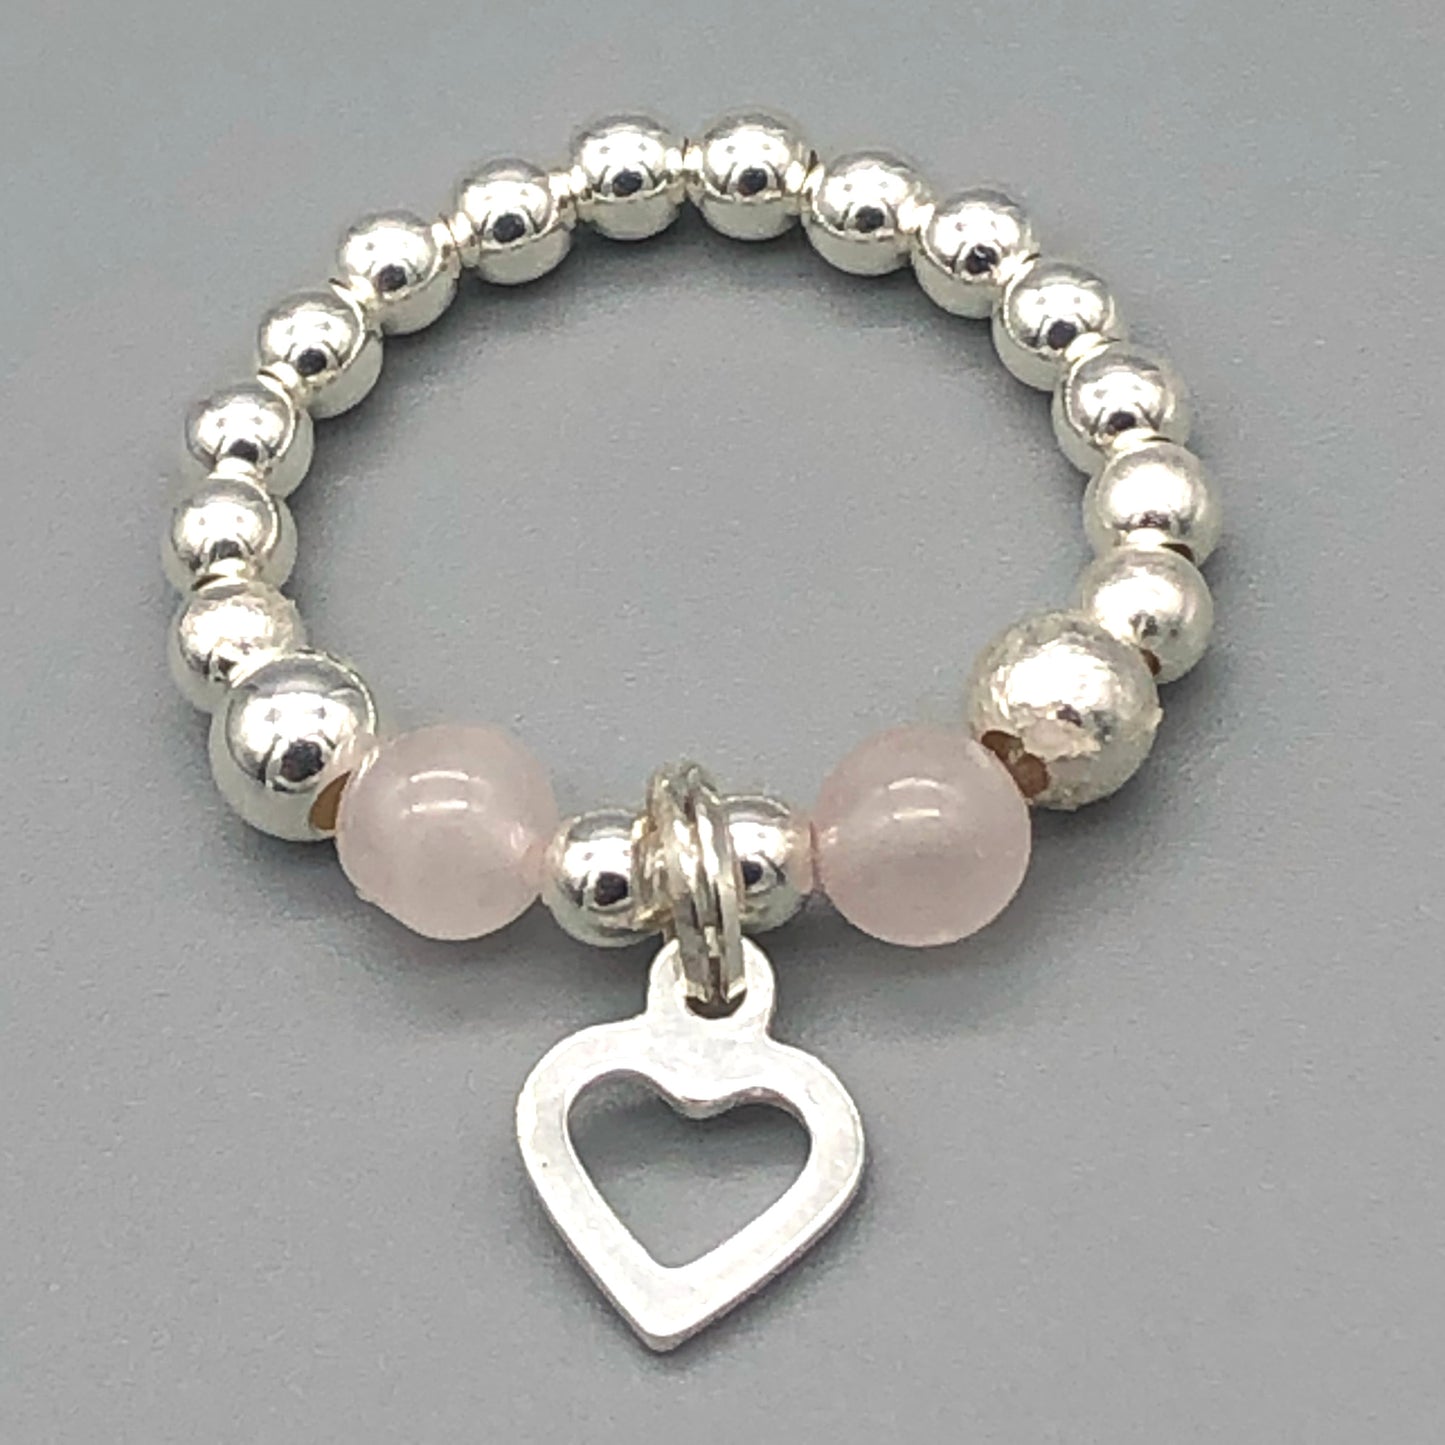 Open heart charm rose quartz & sterling silver bead women's stacking ring by My Silver Wish